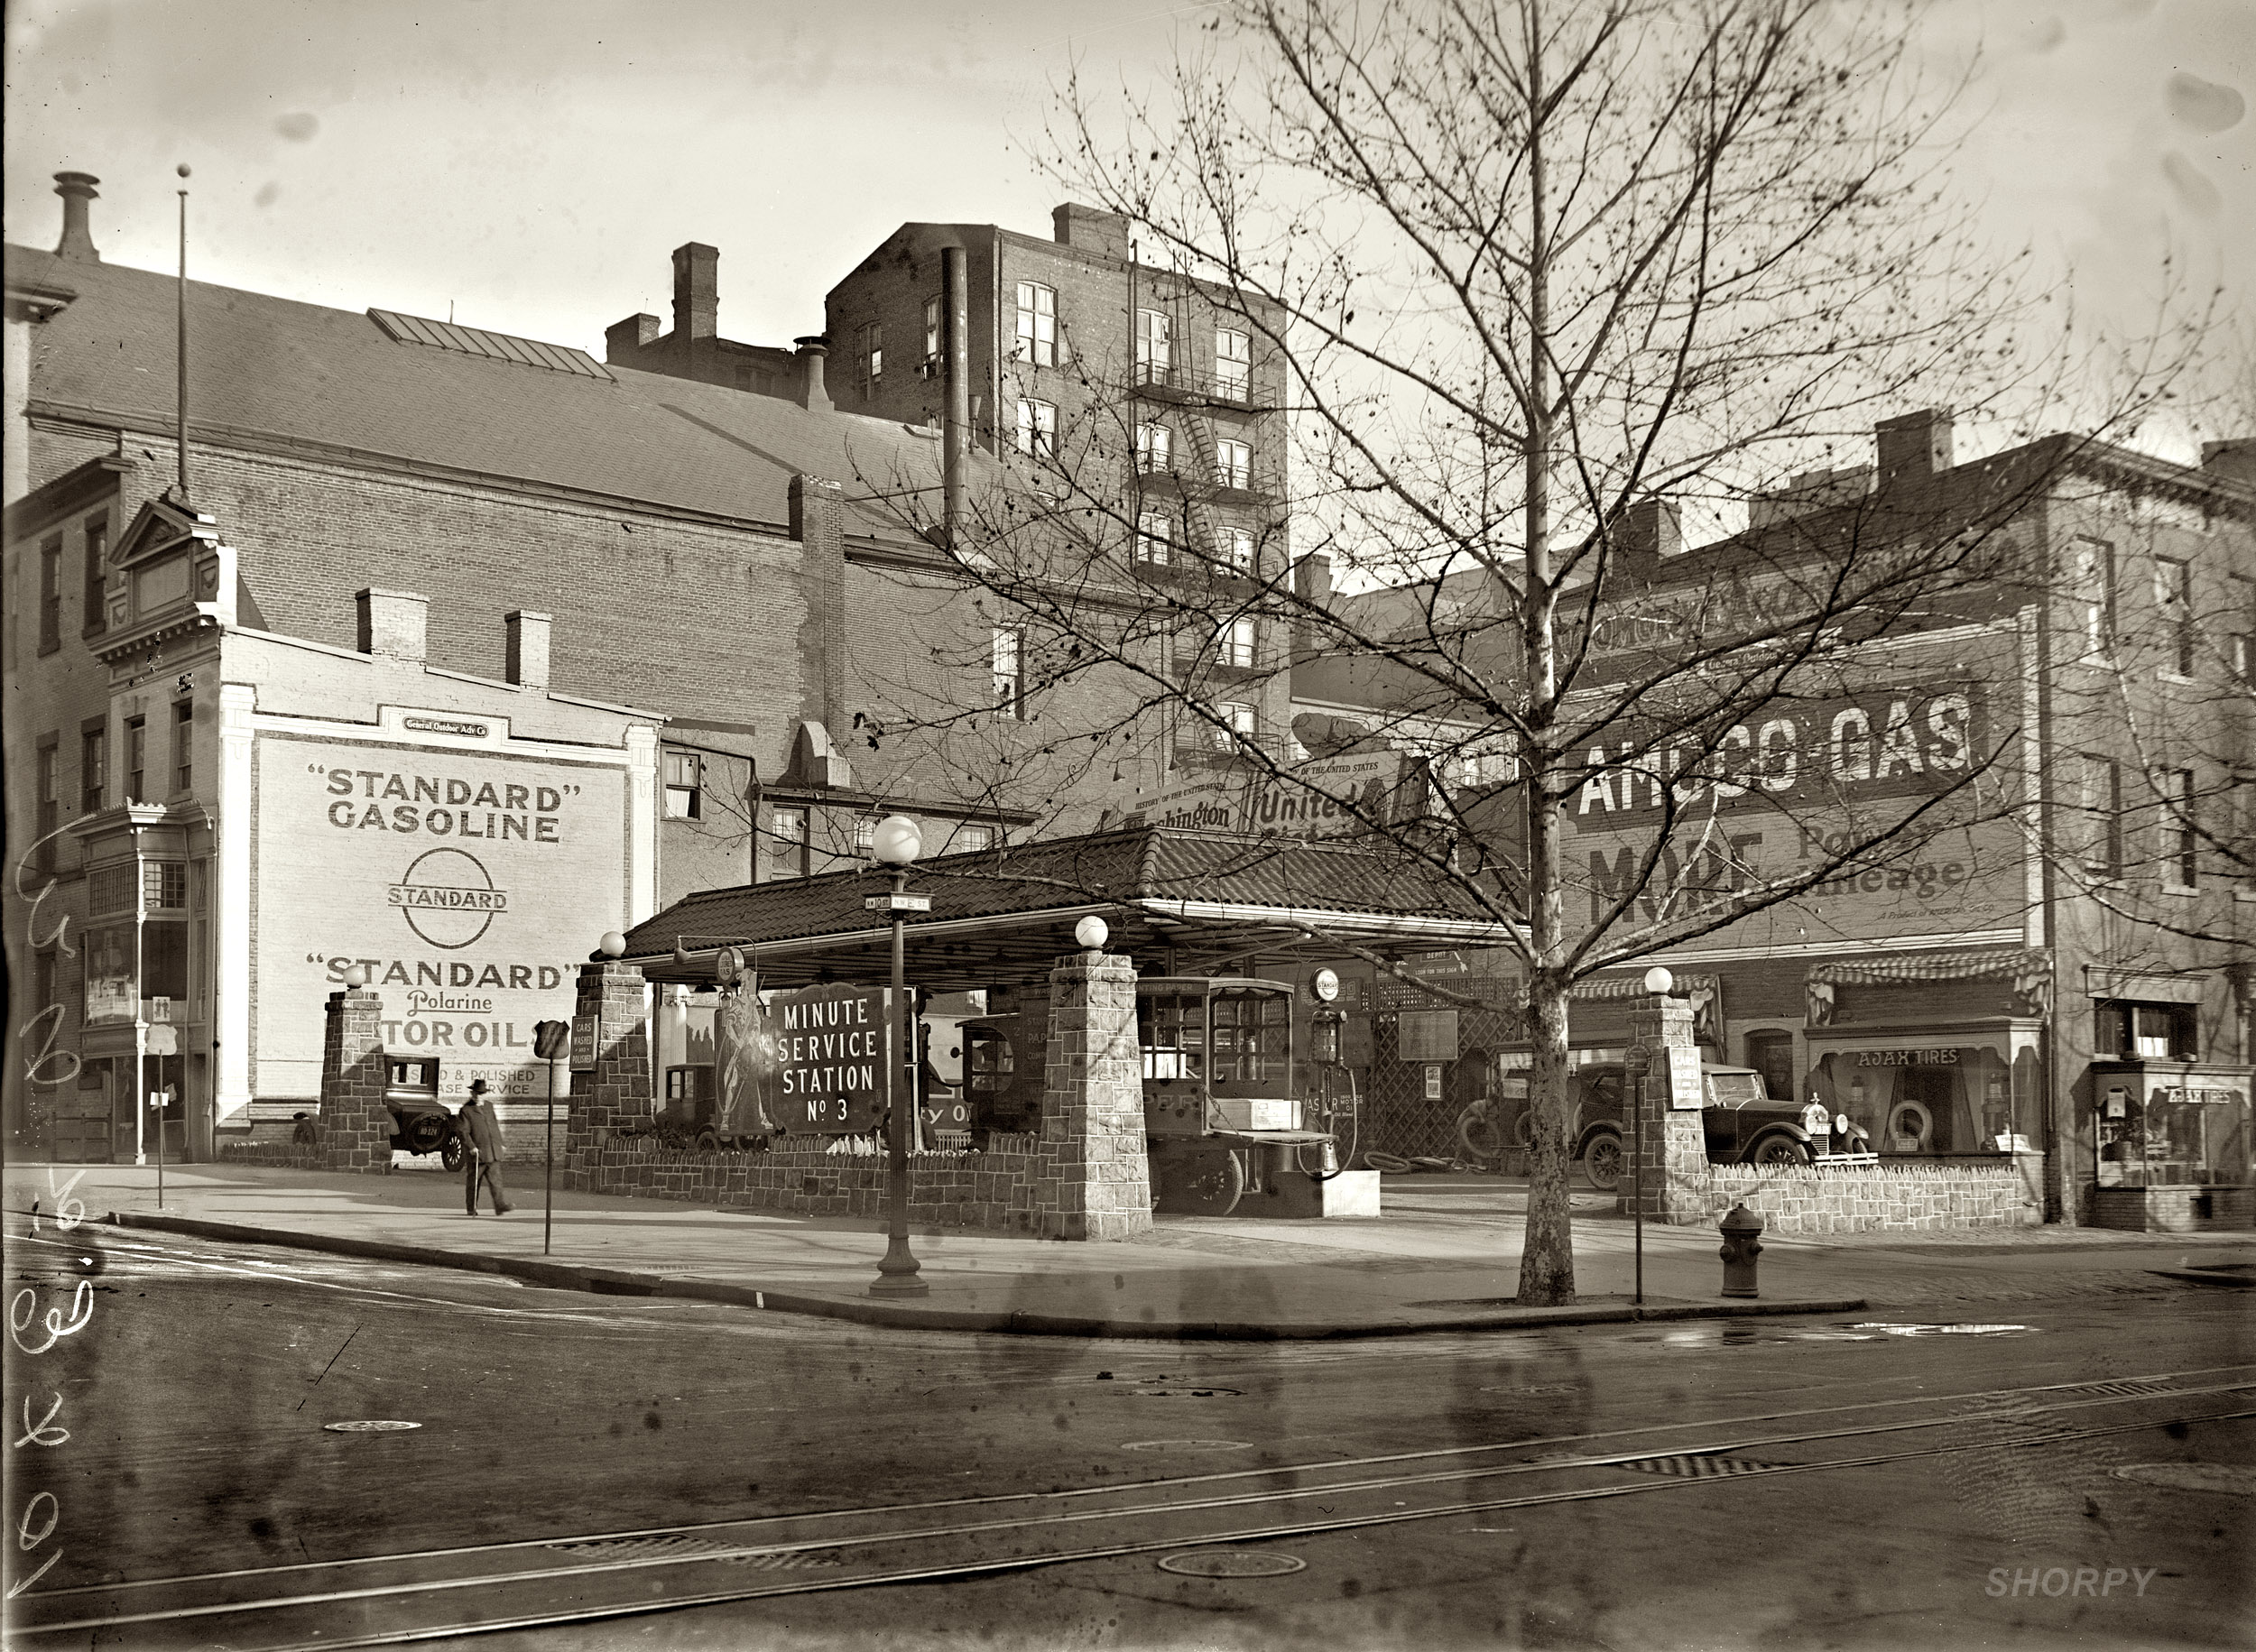 1925. "Minute Service Station No. 3, 10th and E Streets N.W." A Standard Oil gas station in Washington, D.C. National Photo Co. glass negative. View full size.